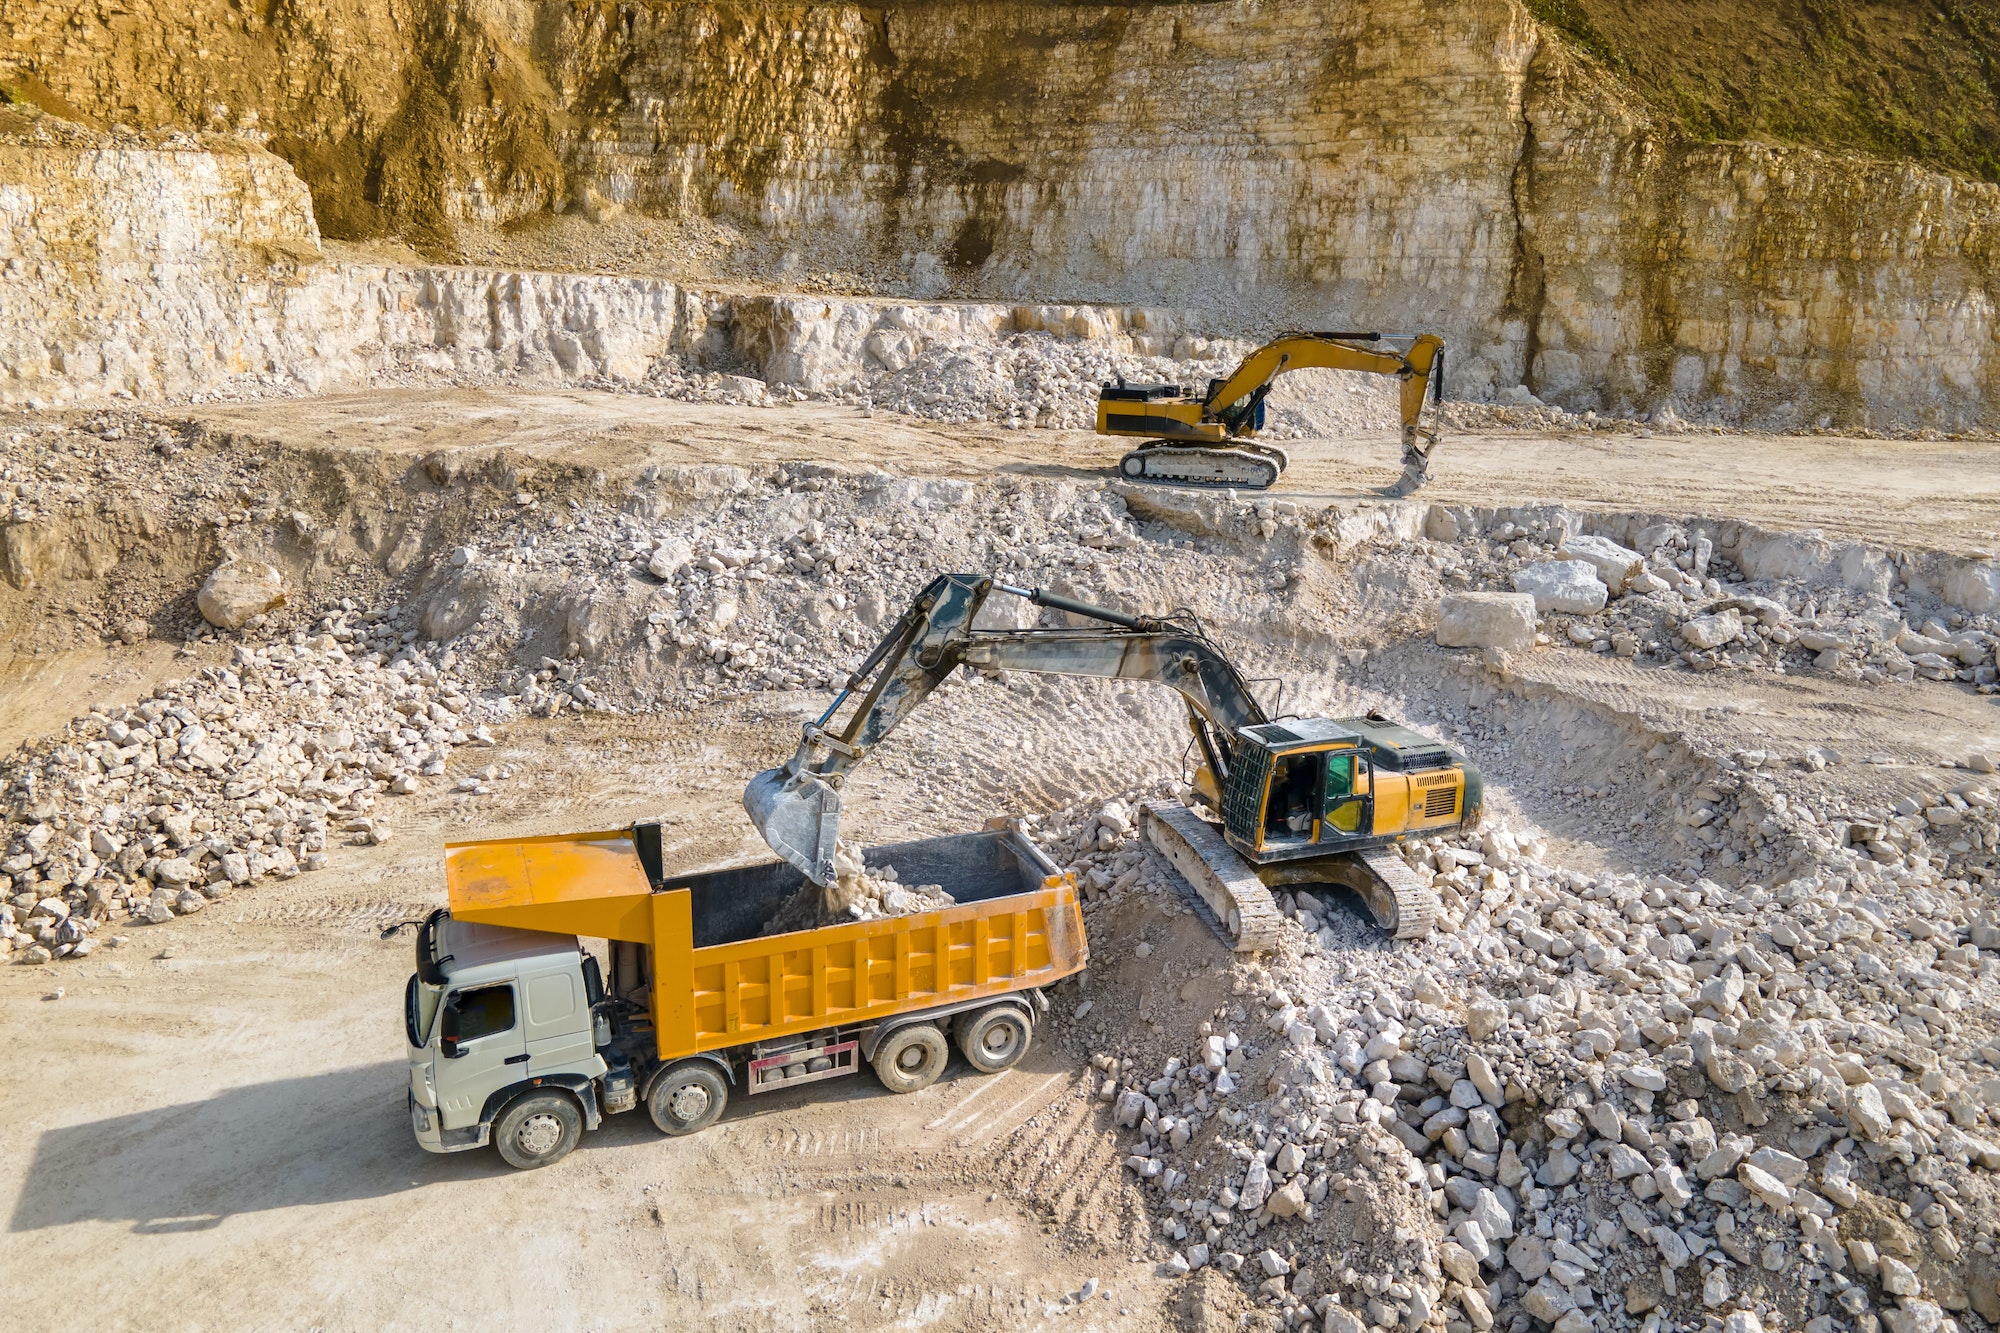 Open pit mining of construction sand stone materials with excavators and dump trucks